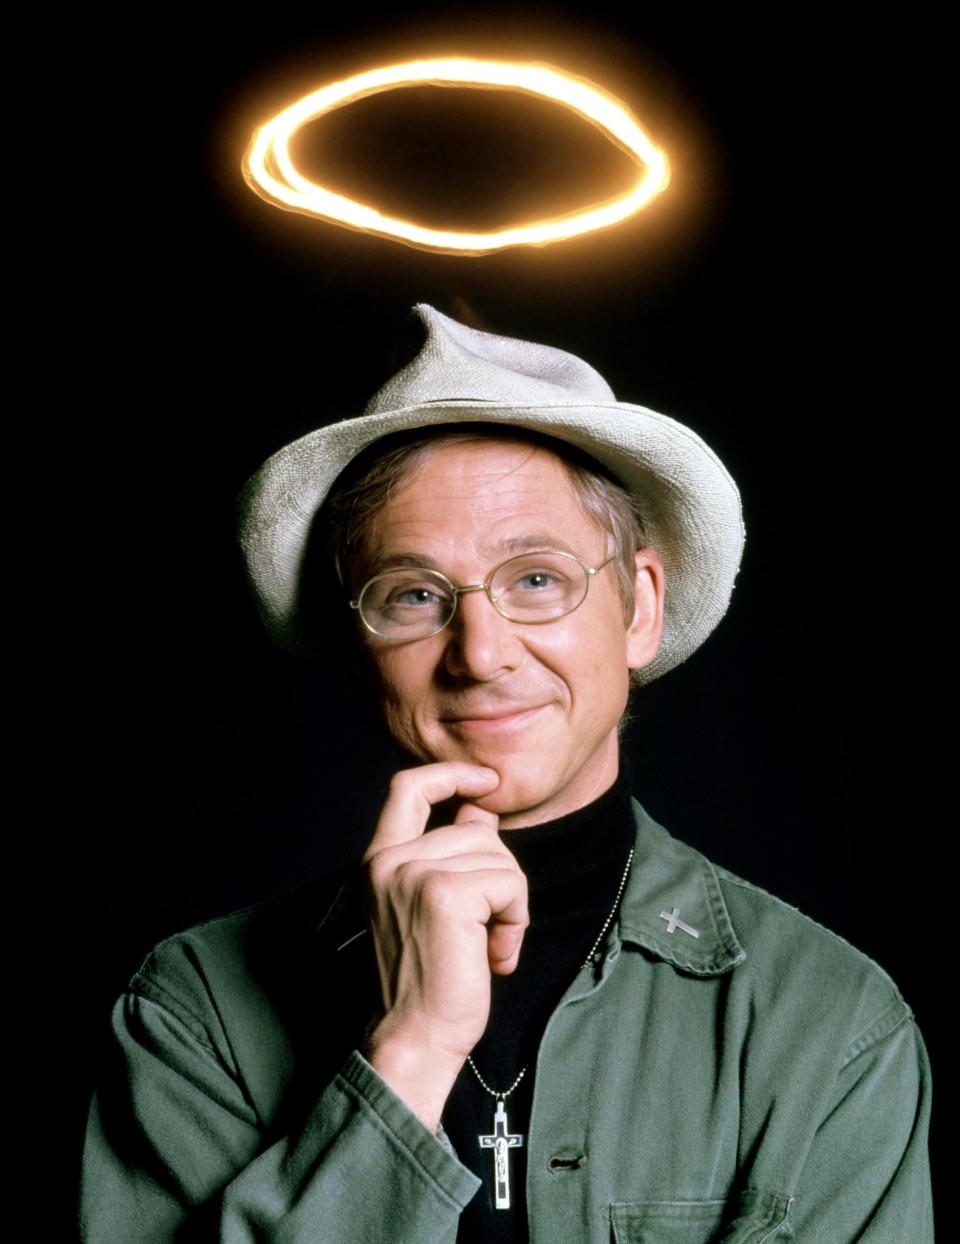 <p>William Christopher, best known as “Father Mulcahey in the long running hit show M.A.S.H. died on December 31, 2016. — (Pictured)–William Christohper as his charachter “Father Mulcahey” in a promo shoot for the TV show, M.A.S.H., 1972-83. (©20th Century Fox Film Corp. All rights reserved./courtesy Everett Collection) </p>